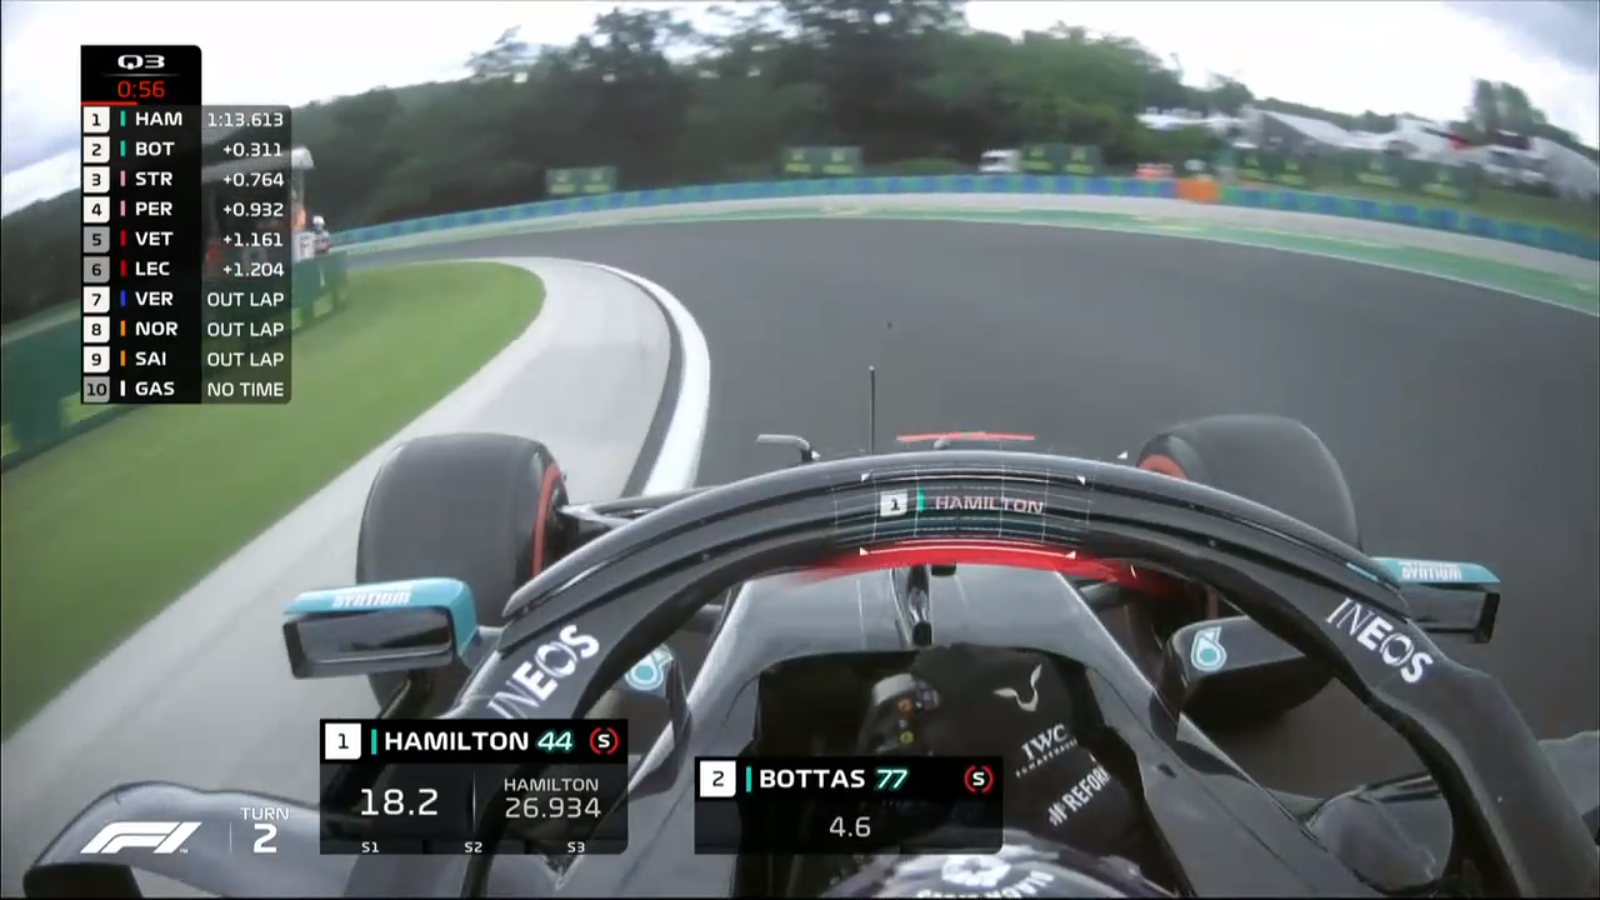 Lewis Hamilton's view as he lines up for the apex of a curve.